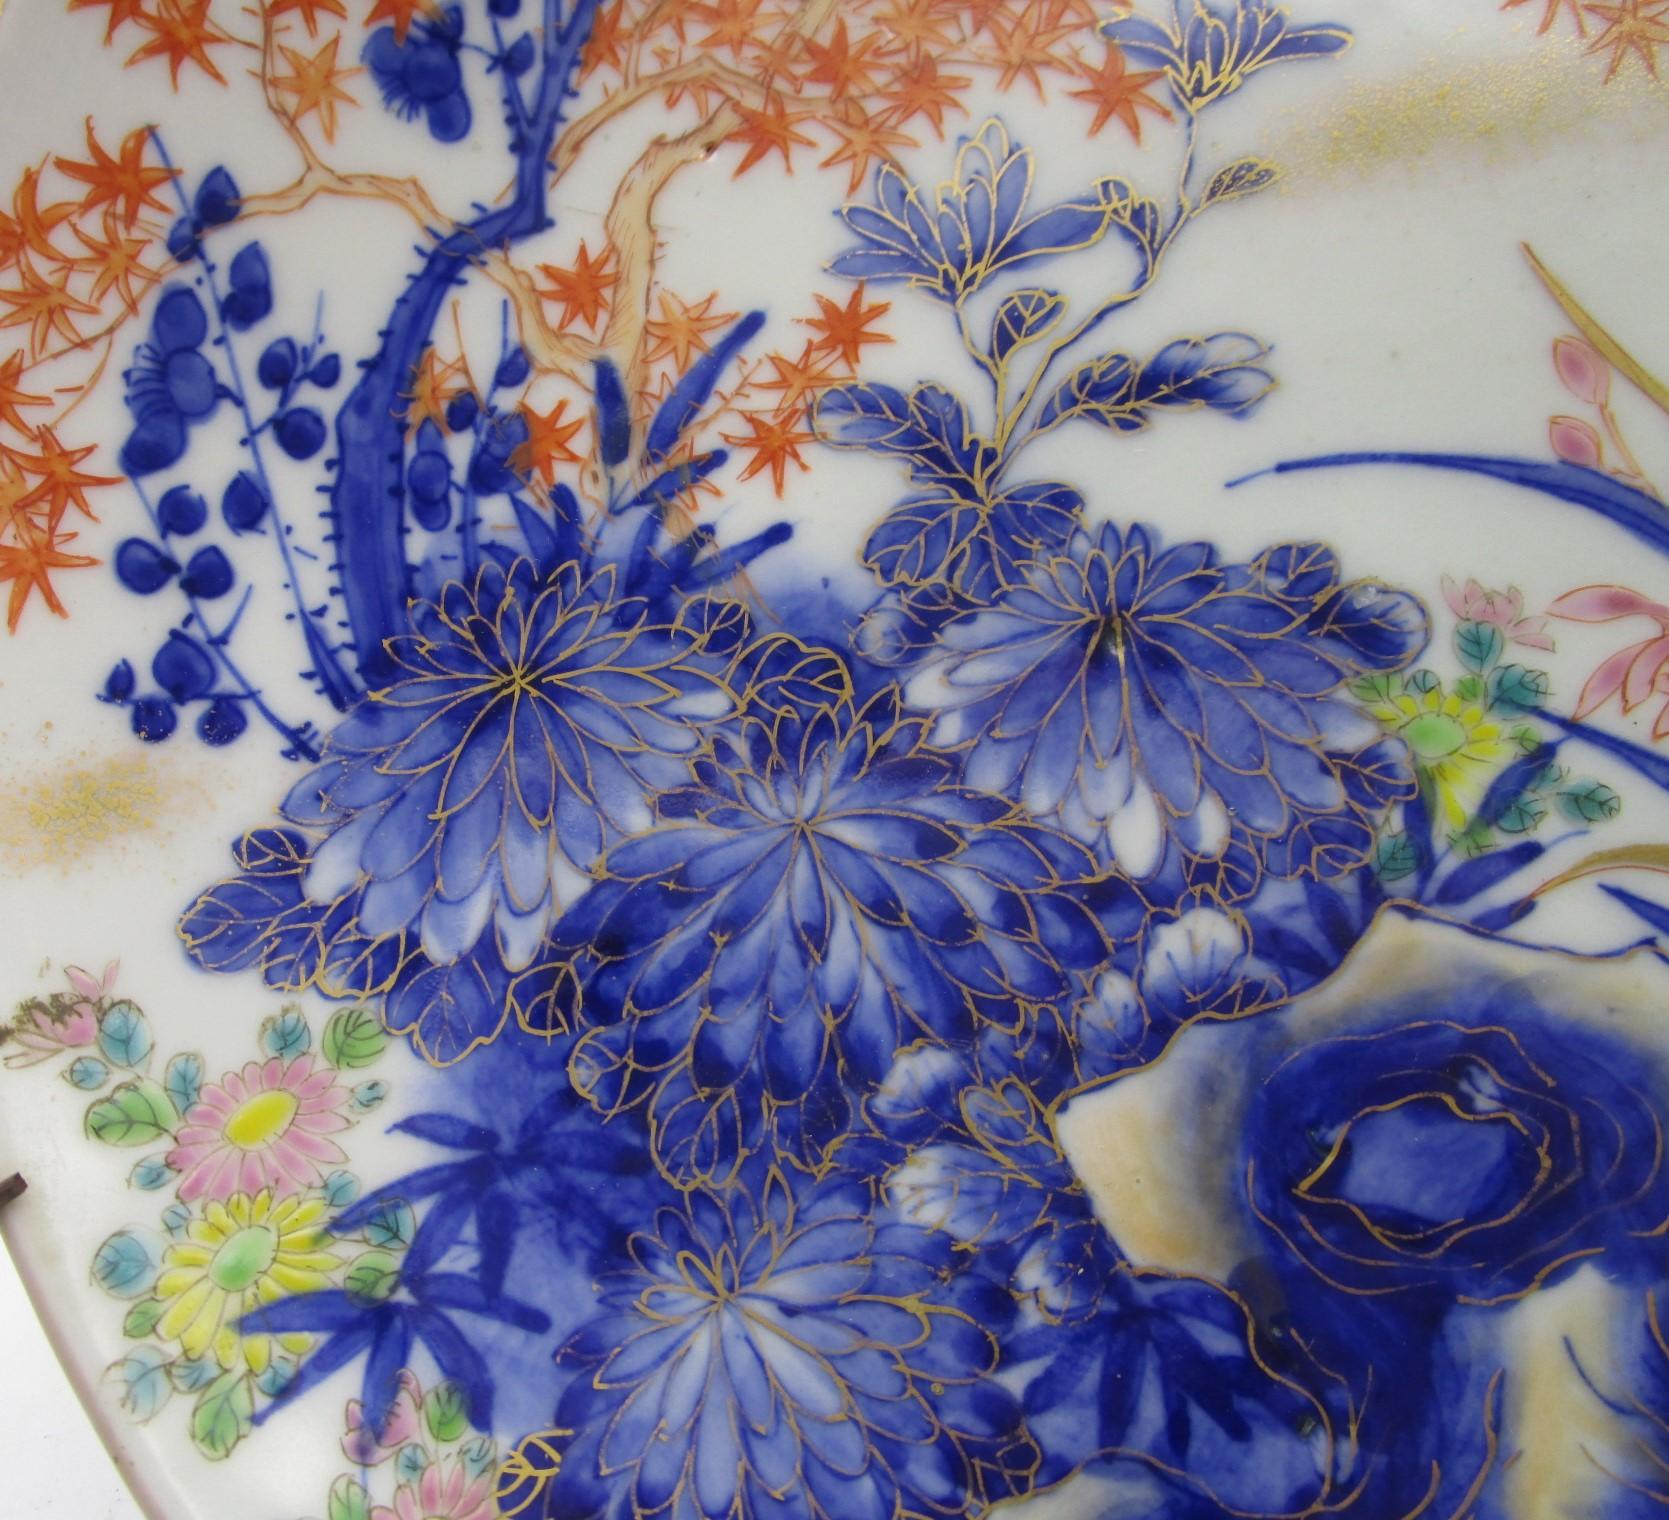 Exquisite late 19th century Japanese Fukagawa porcelain charger, circa 1890s, Meiji period (1868-1912).It depicts rocks and auspicious chrysanthemums in cobalt blue and maples in orange red, with generous gold details. The reverse side is decorated